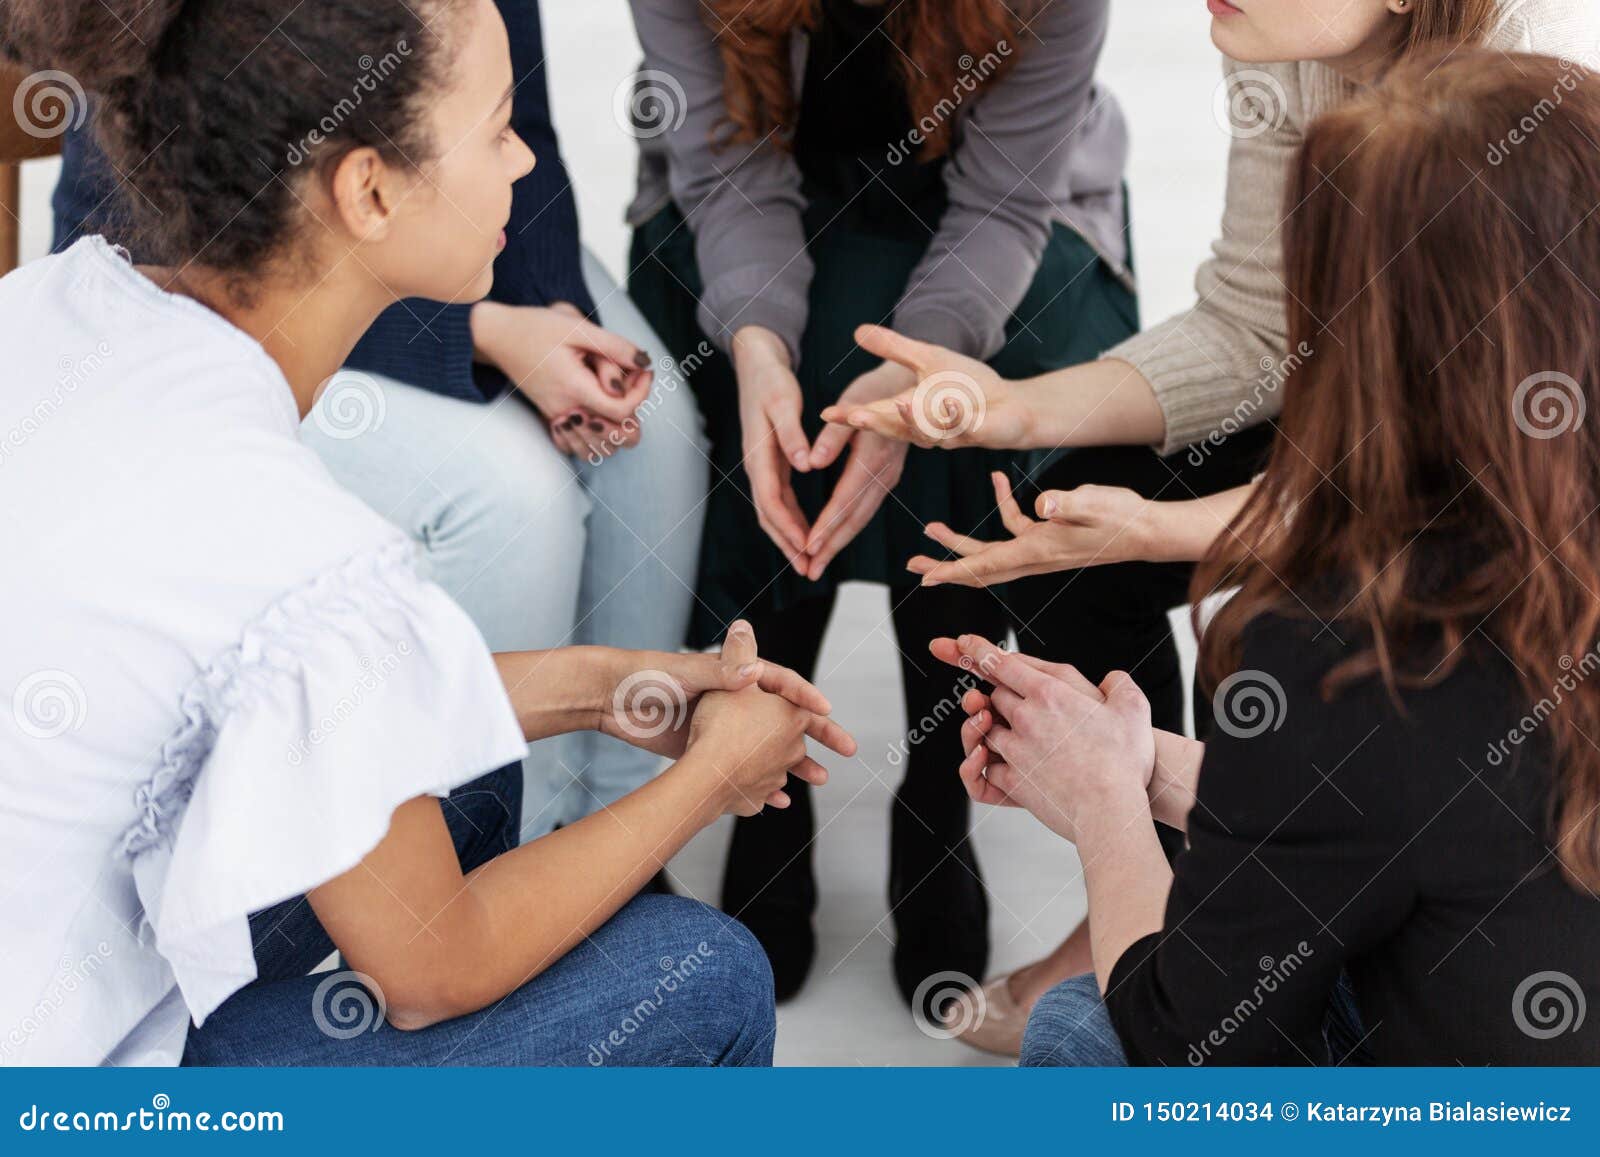 group of young women talking sitting in a circle. psychological support concept